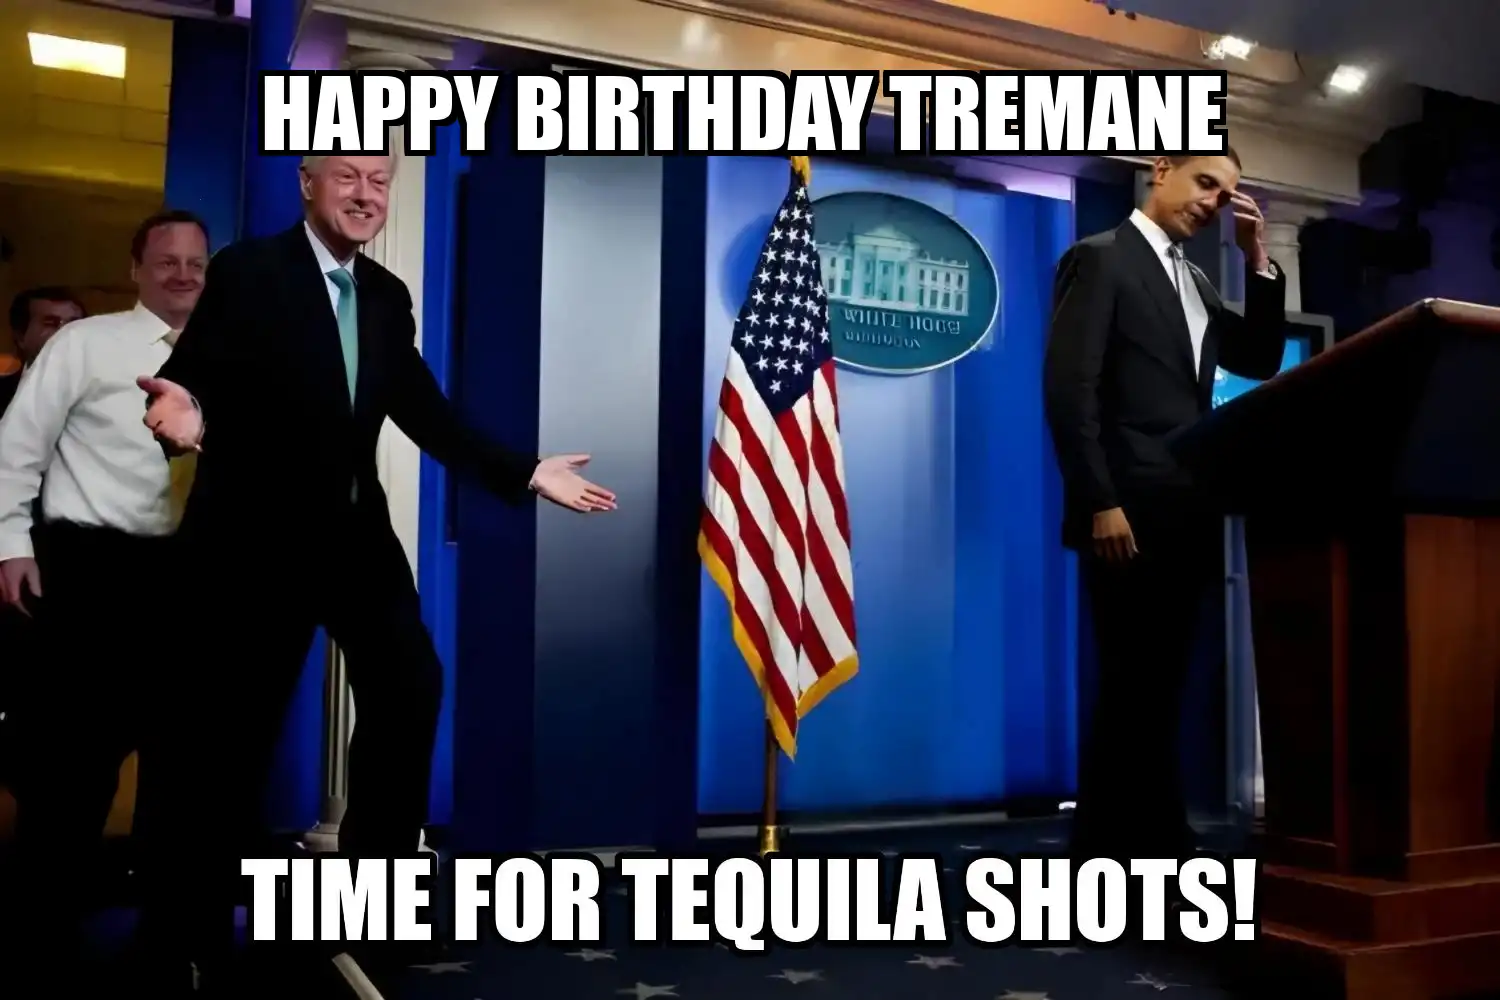 Happy Birthday Tremane Time For Tequila Shots Memes